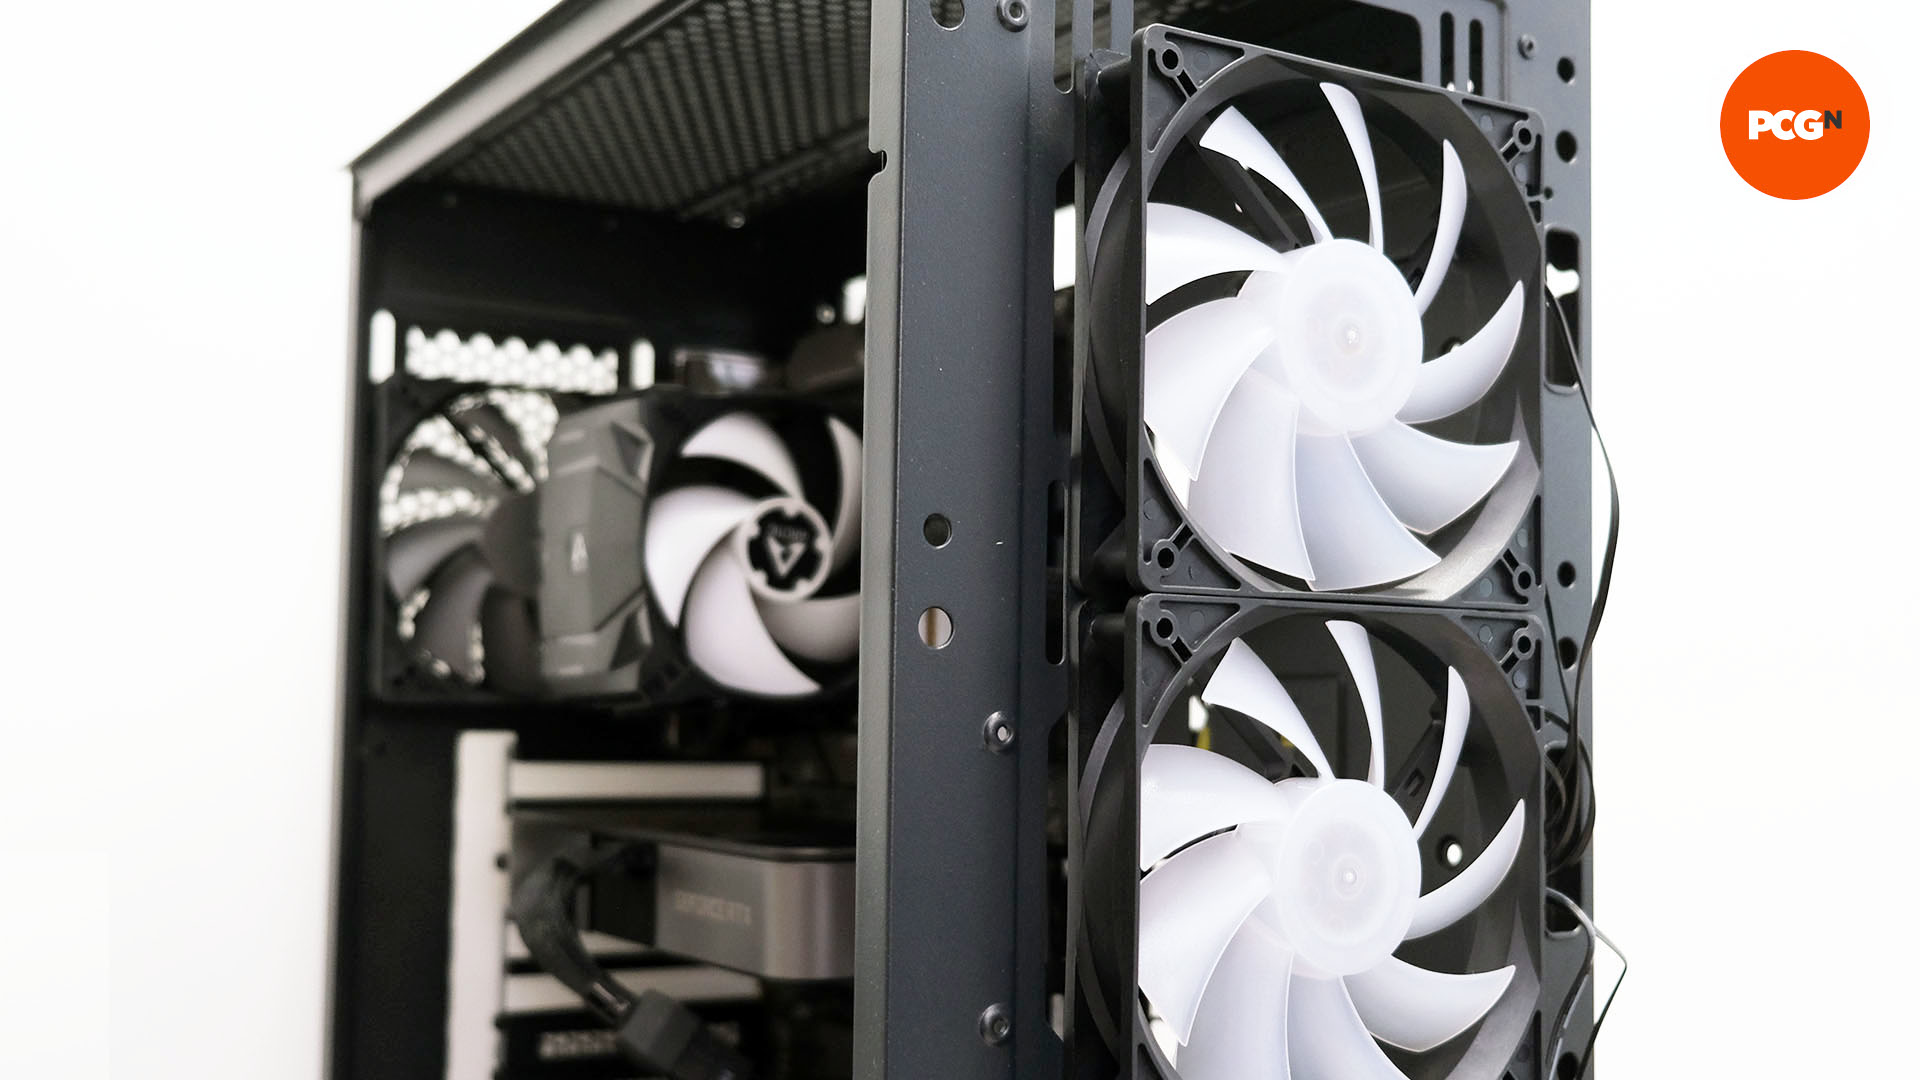 The chassis of a PC case with two fans mounted to the front